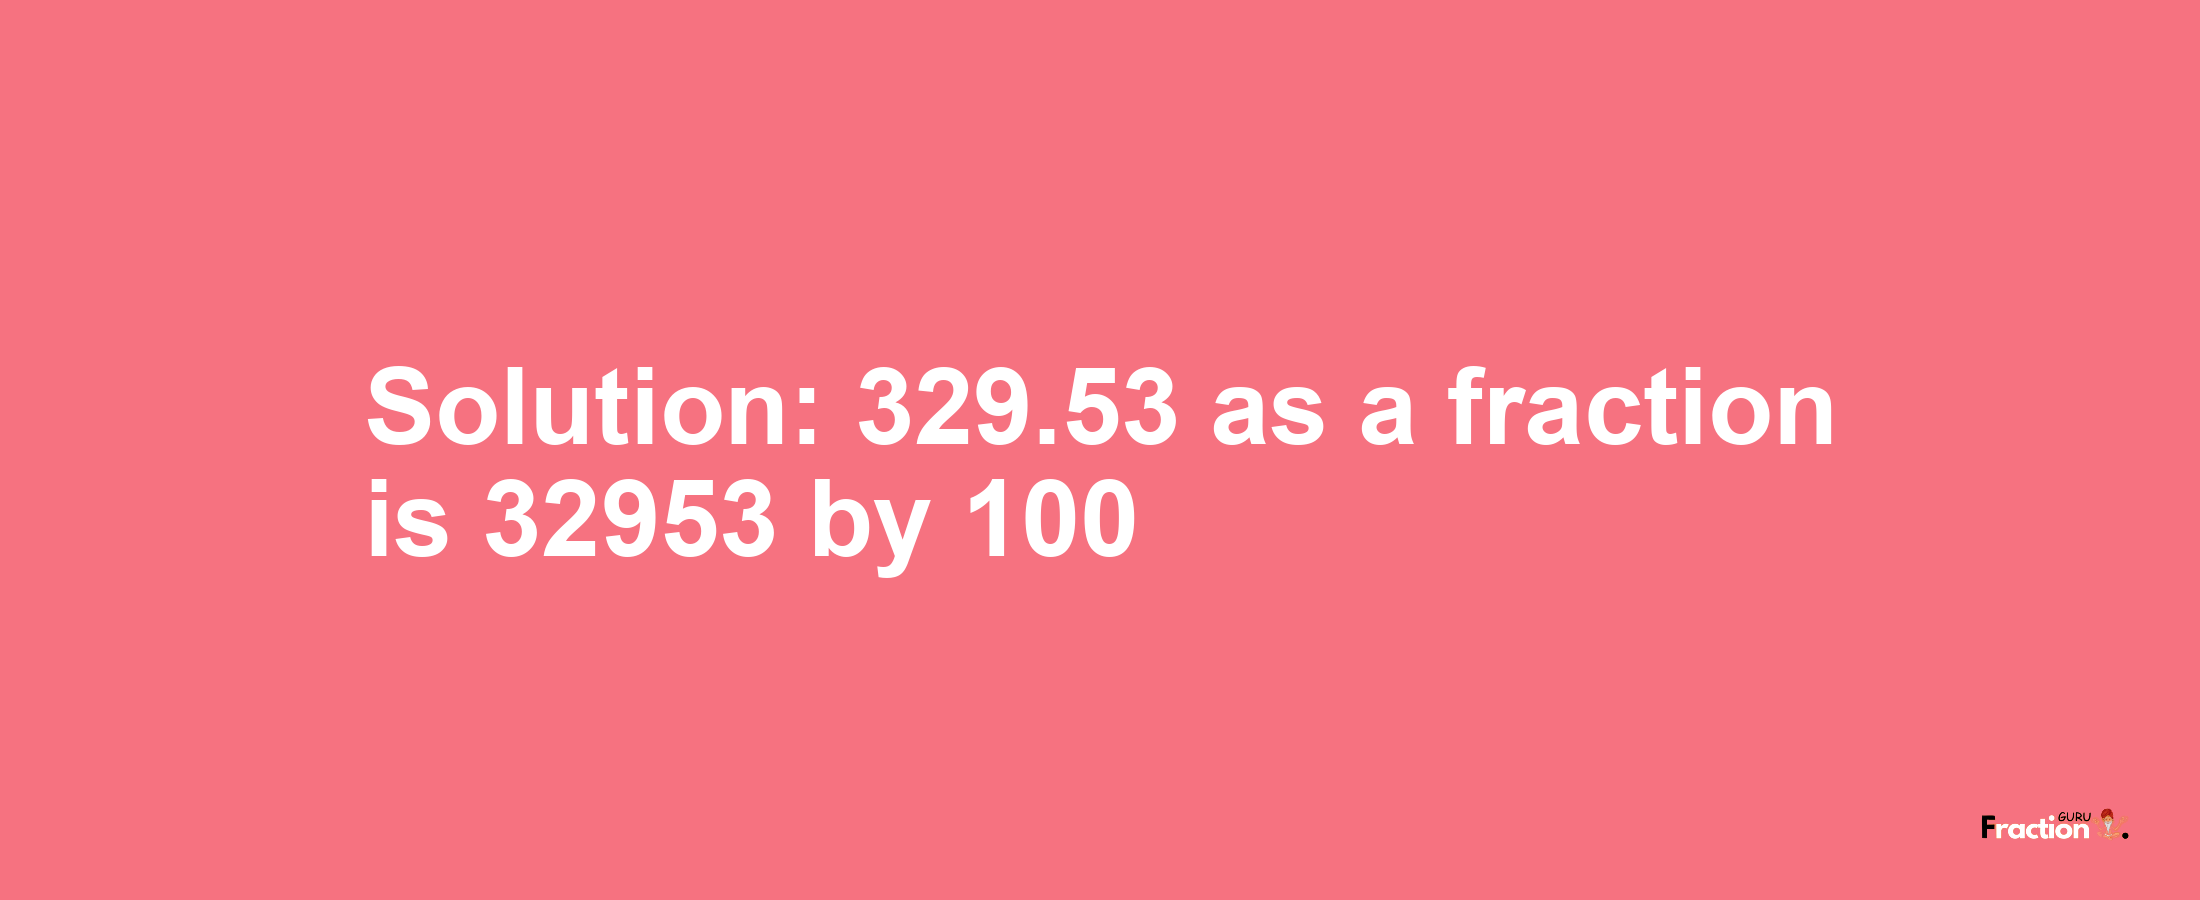 Solution:329.53 as a fraction is 32953/100